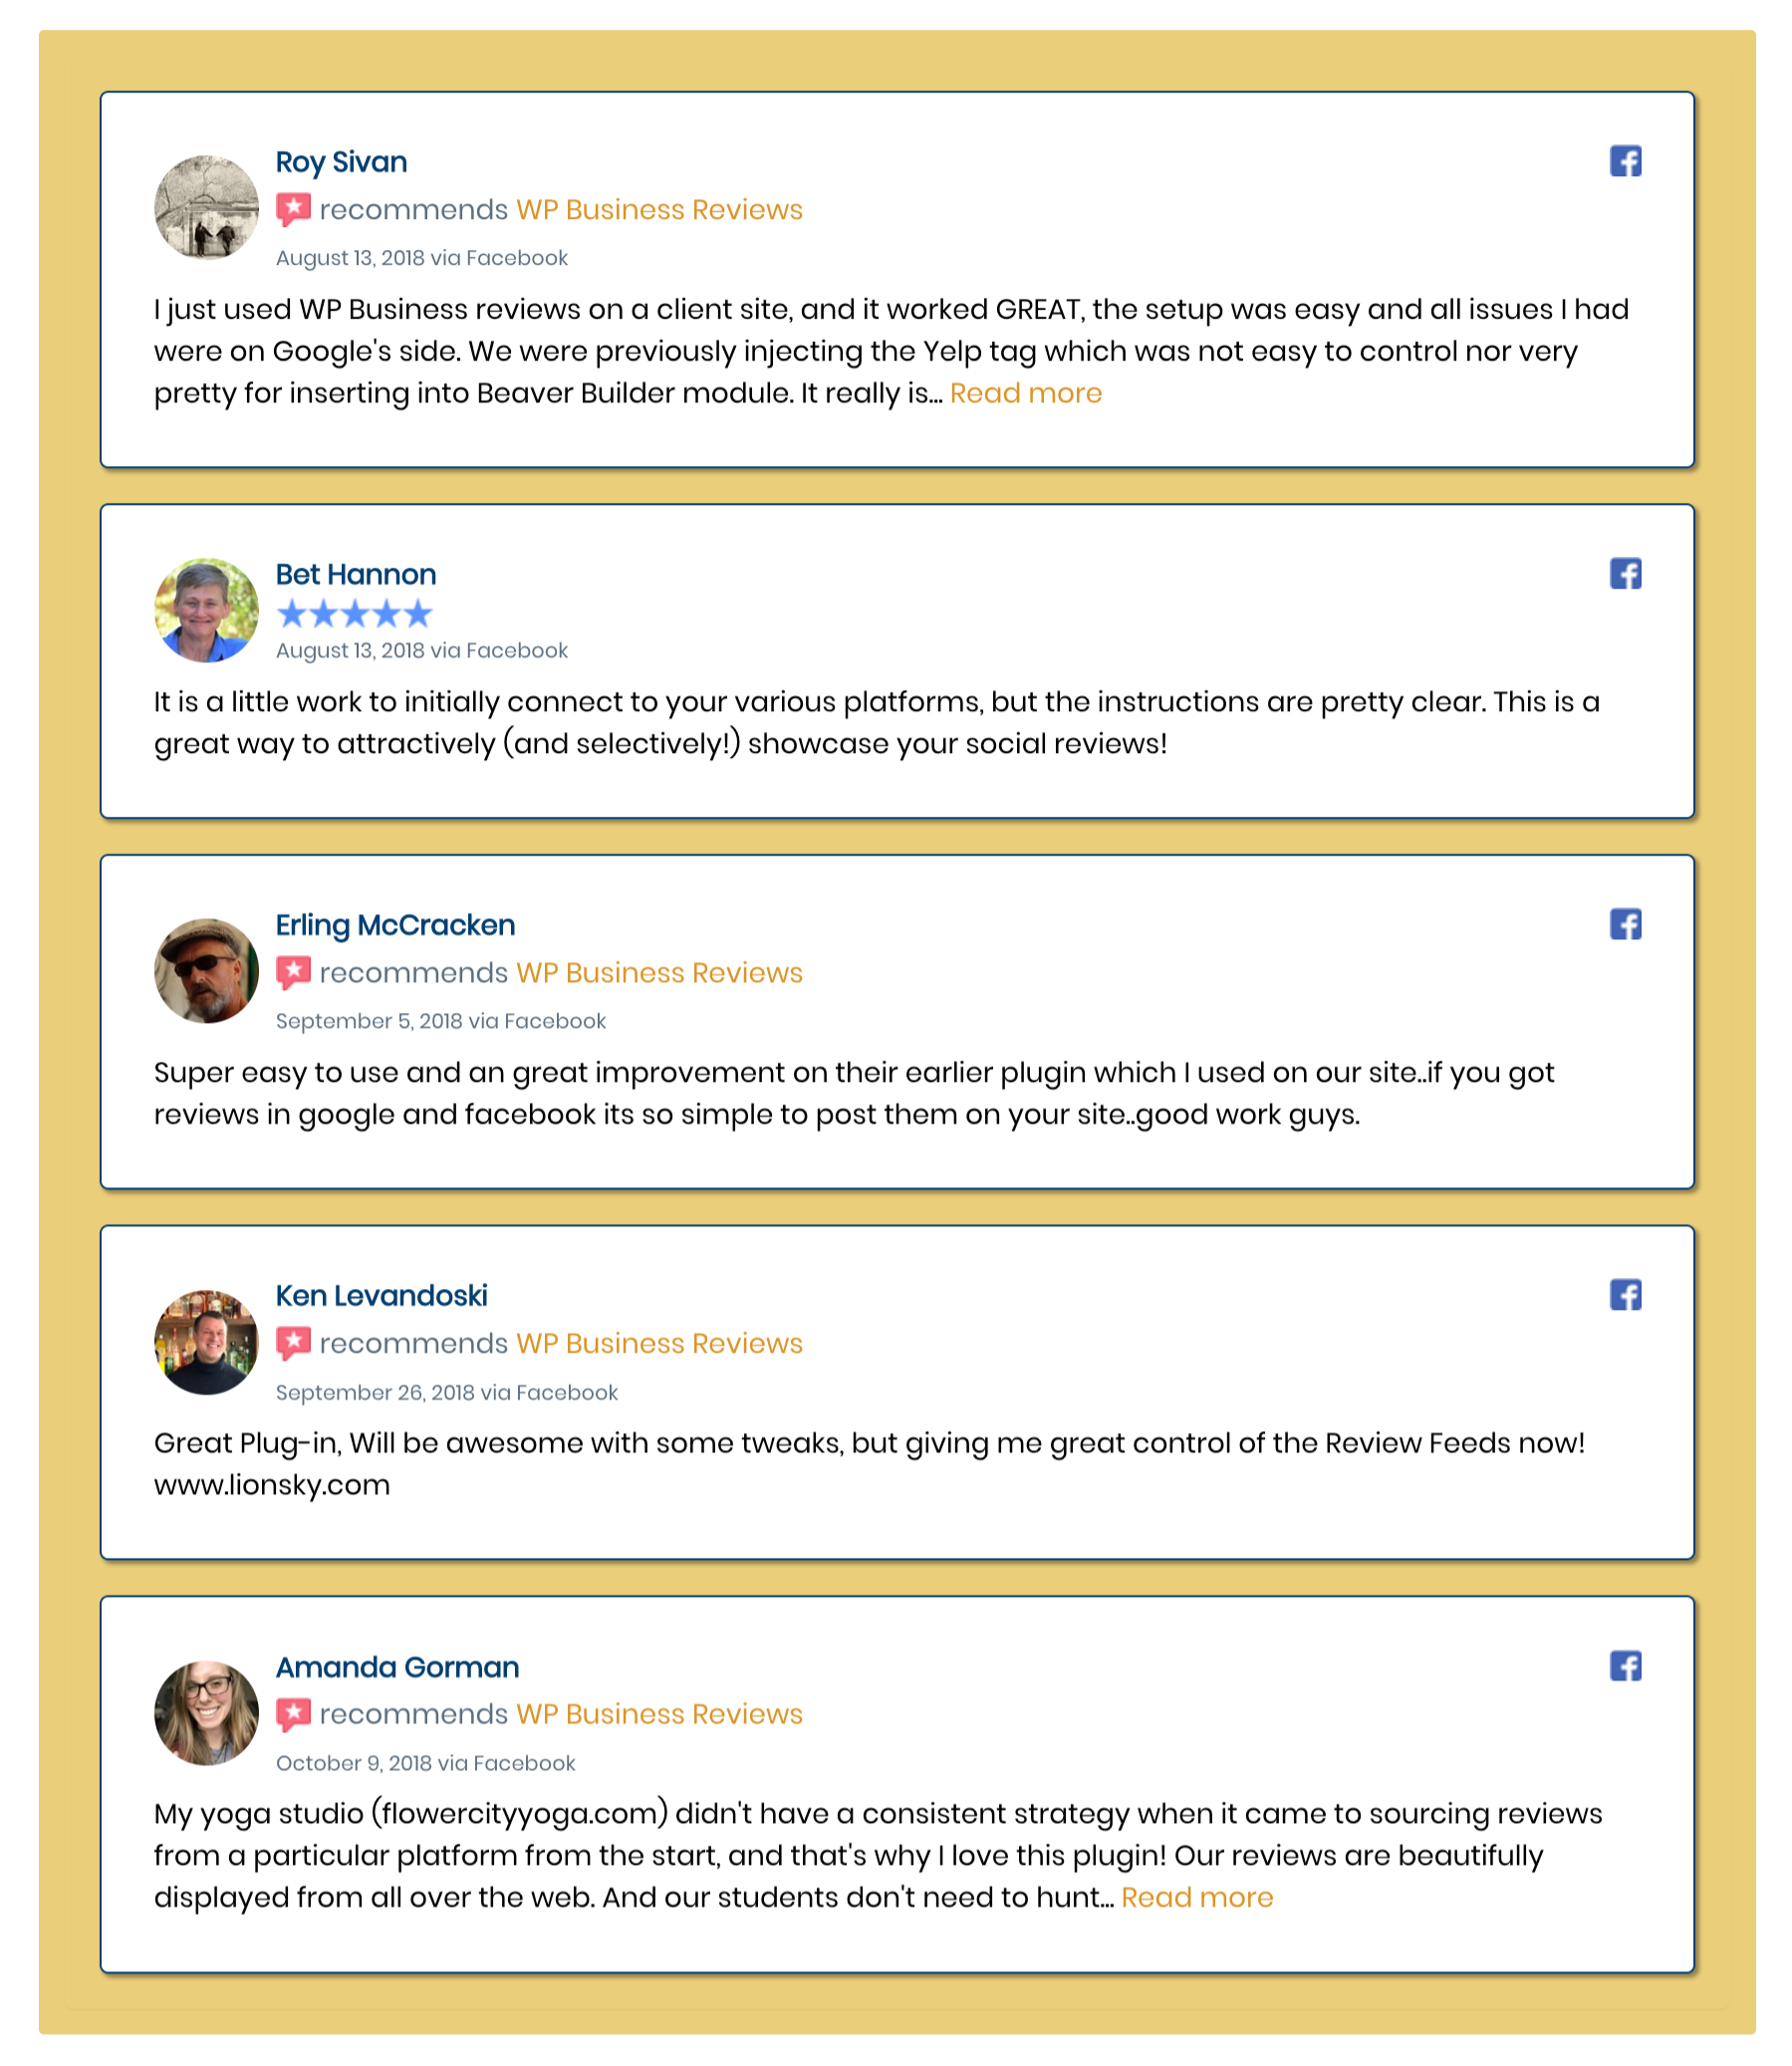 The code snippet creates a list with a single column of reviews, displaying white review containers with blue borders that cast a shadow on a yellow backdrop. The blue navigation bullets are the same blue as the reviewer name.